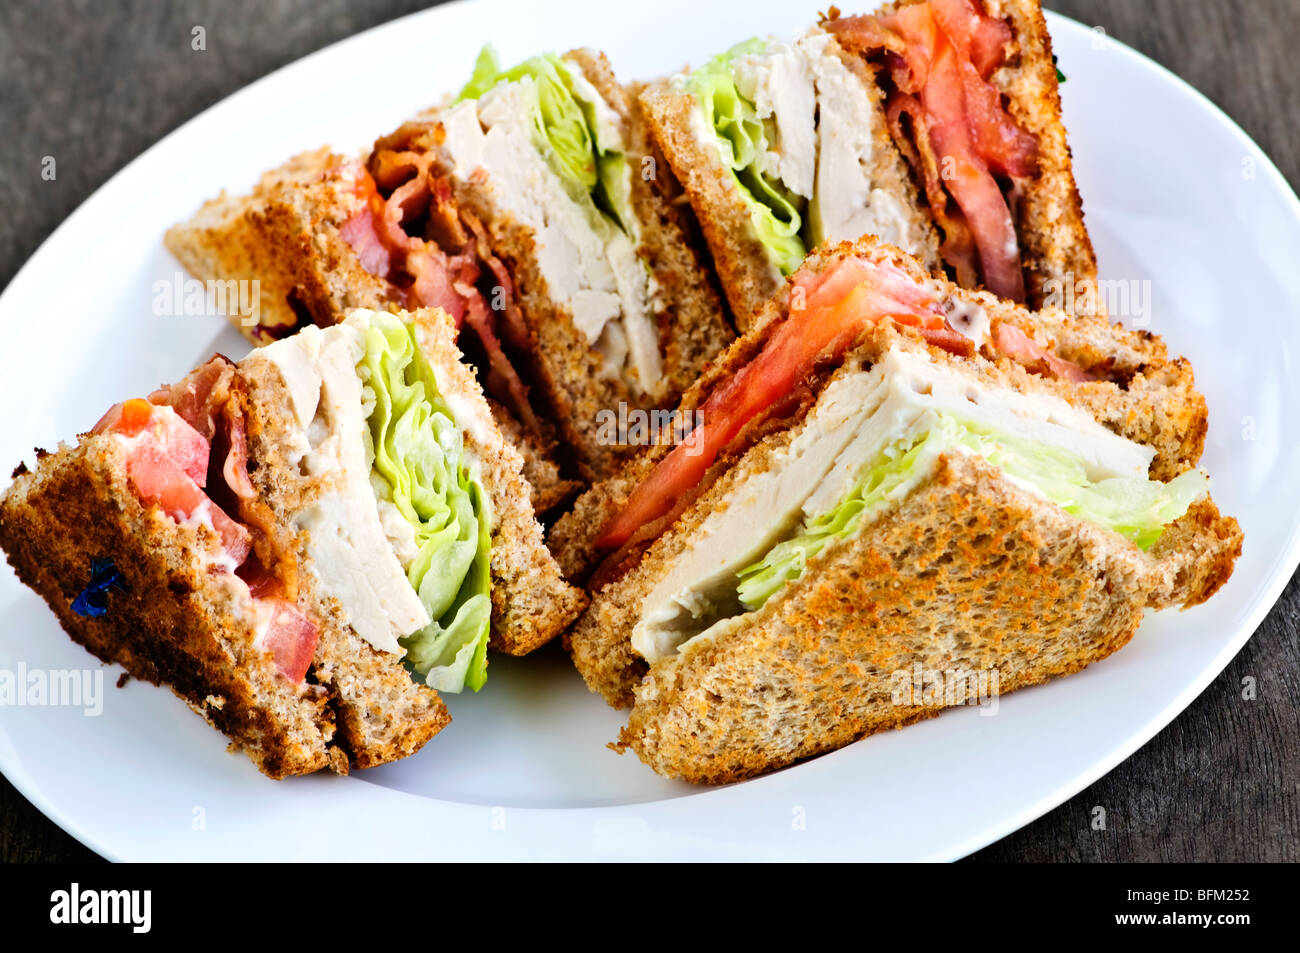 Toasted club sandwich sliced on a plate Stock Photo